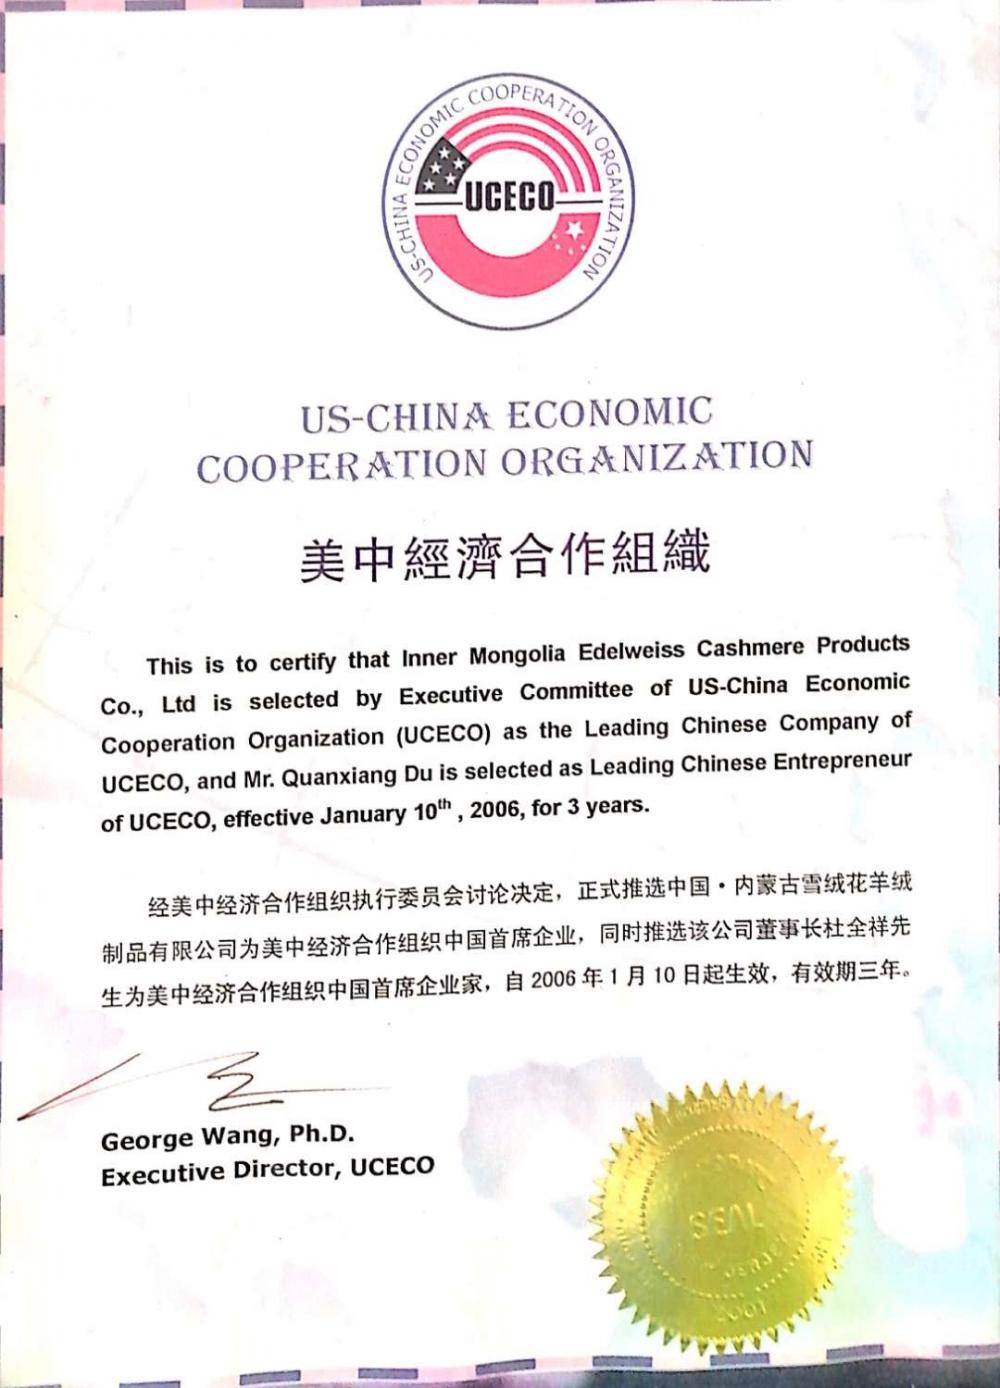 LEADING CHINESE COMPANY OF UCECO